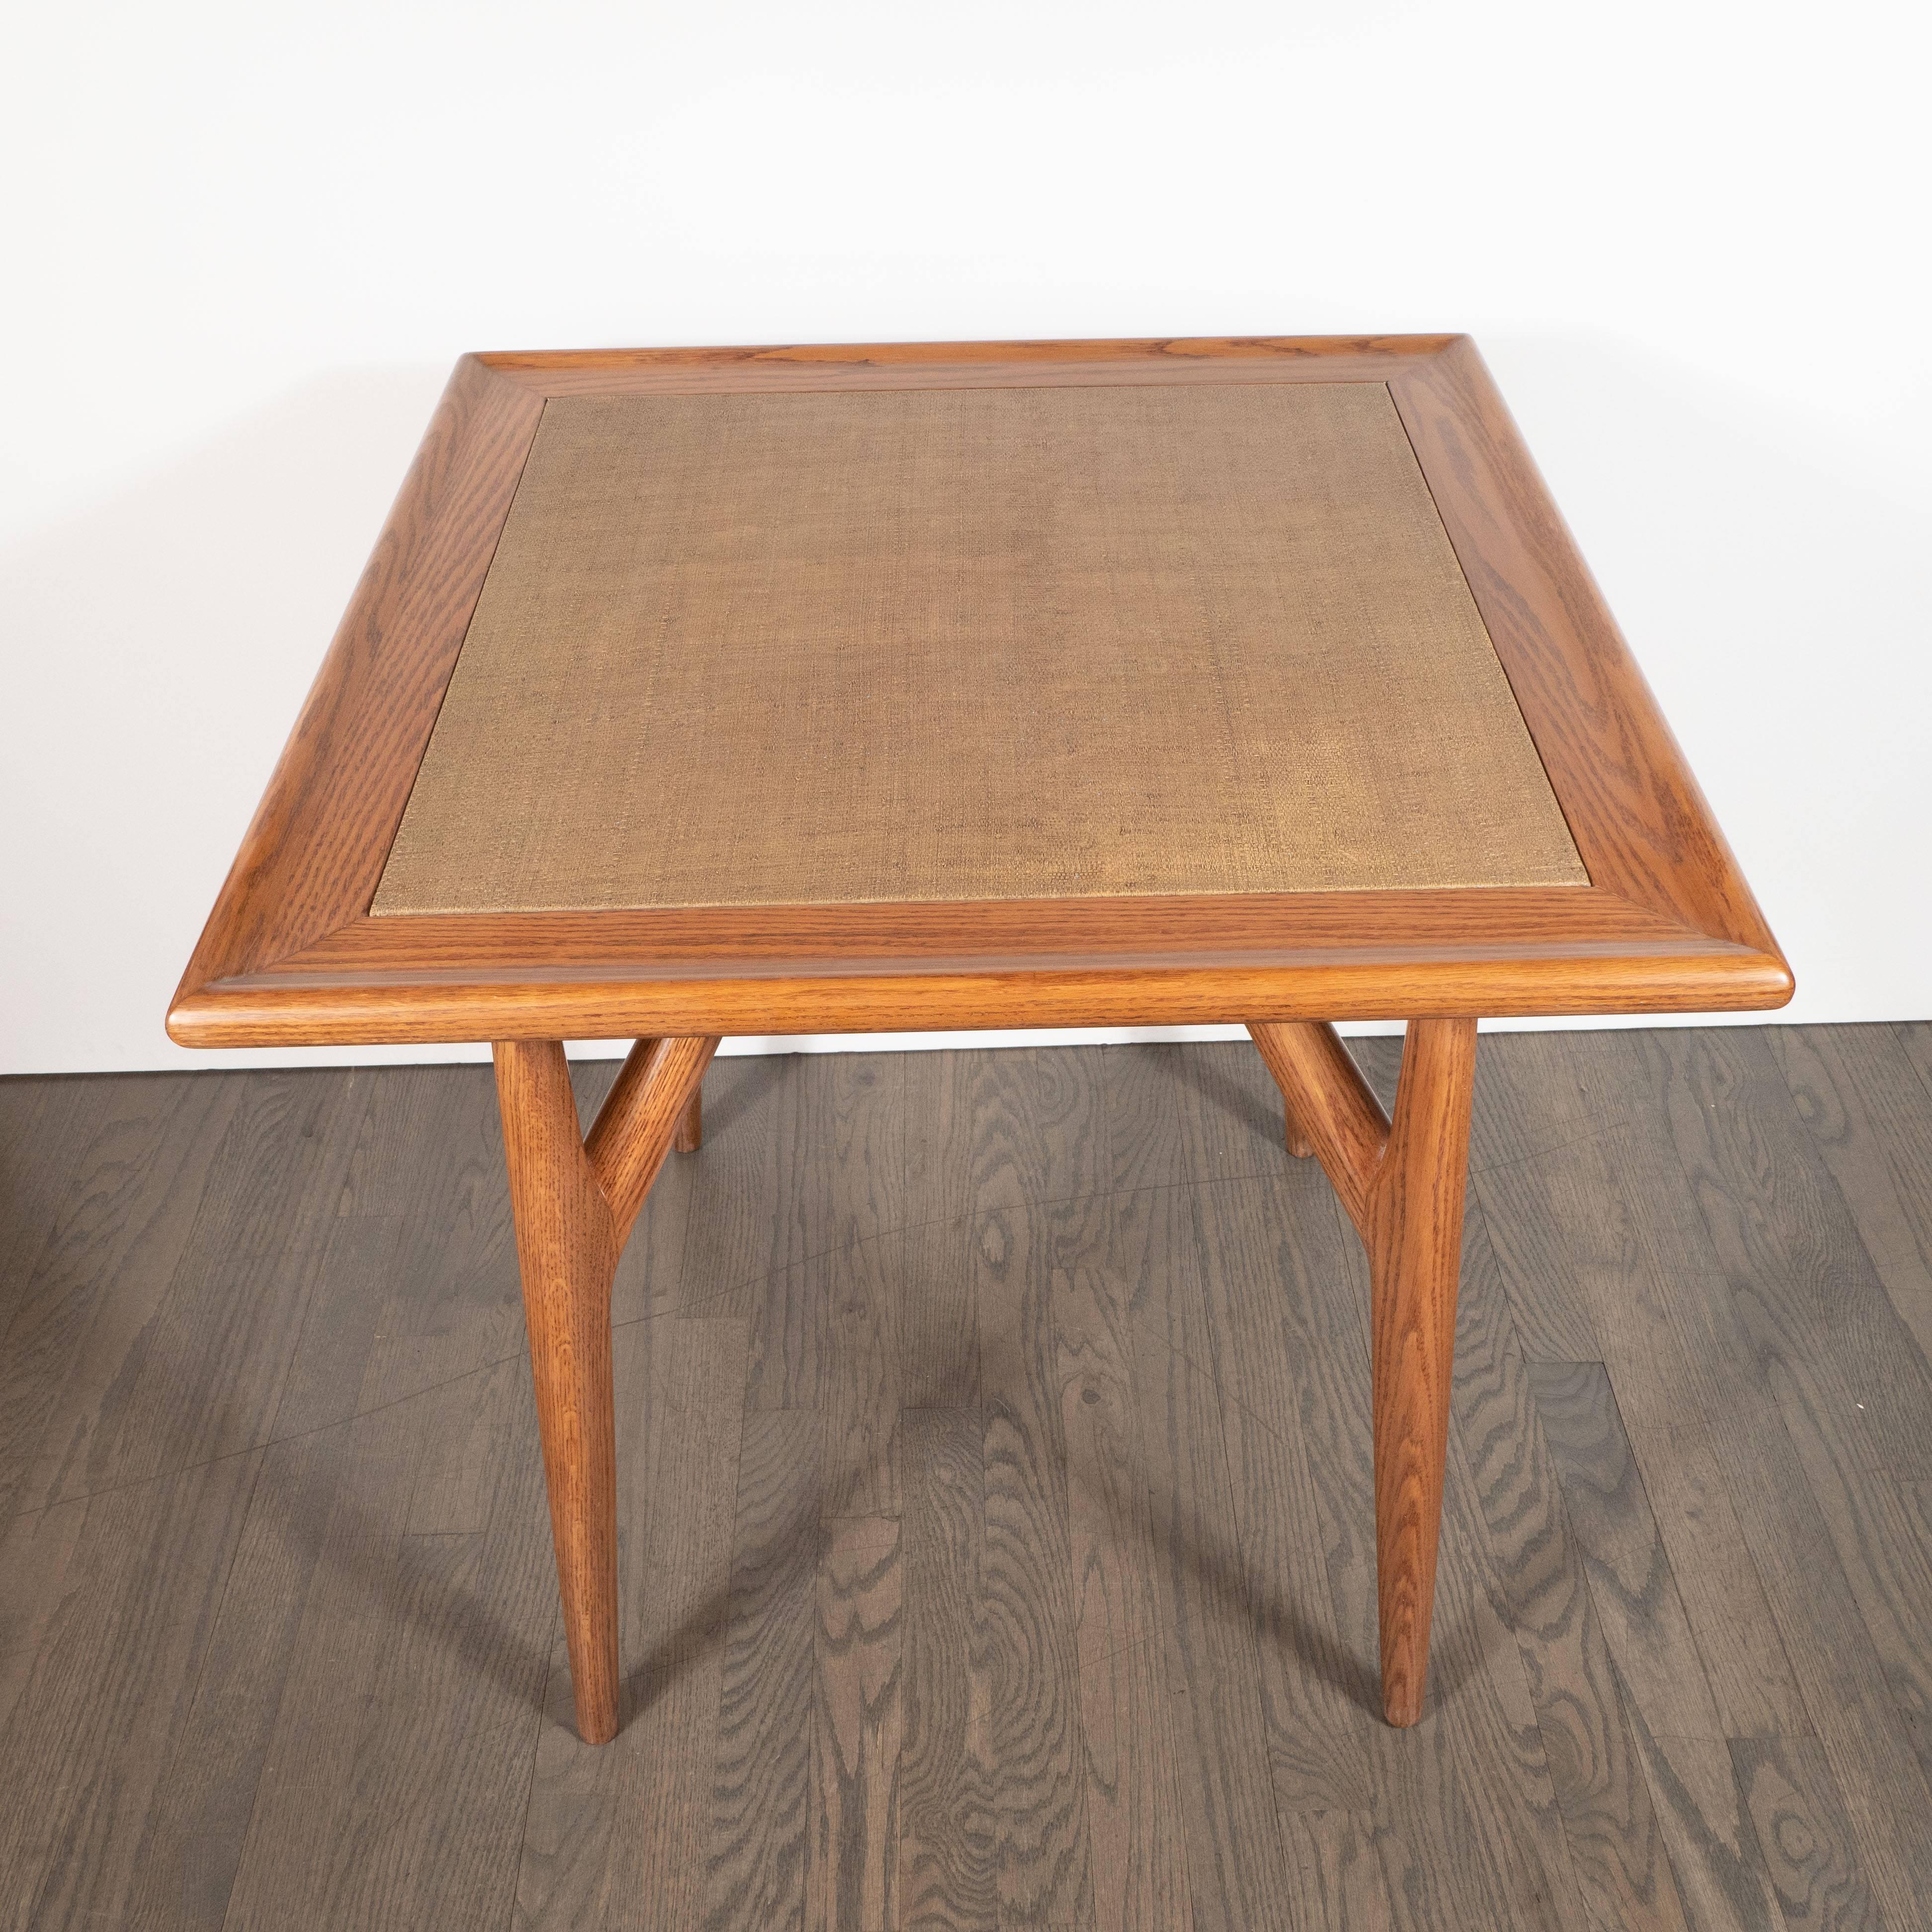 American Mid-Century Modern Sculptural White Oak Table with Wrapped Linen Top For Sale